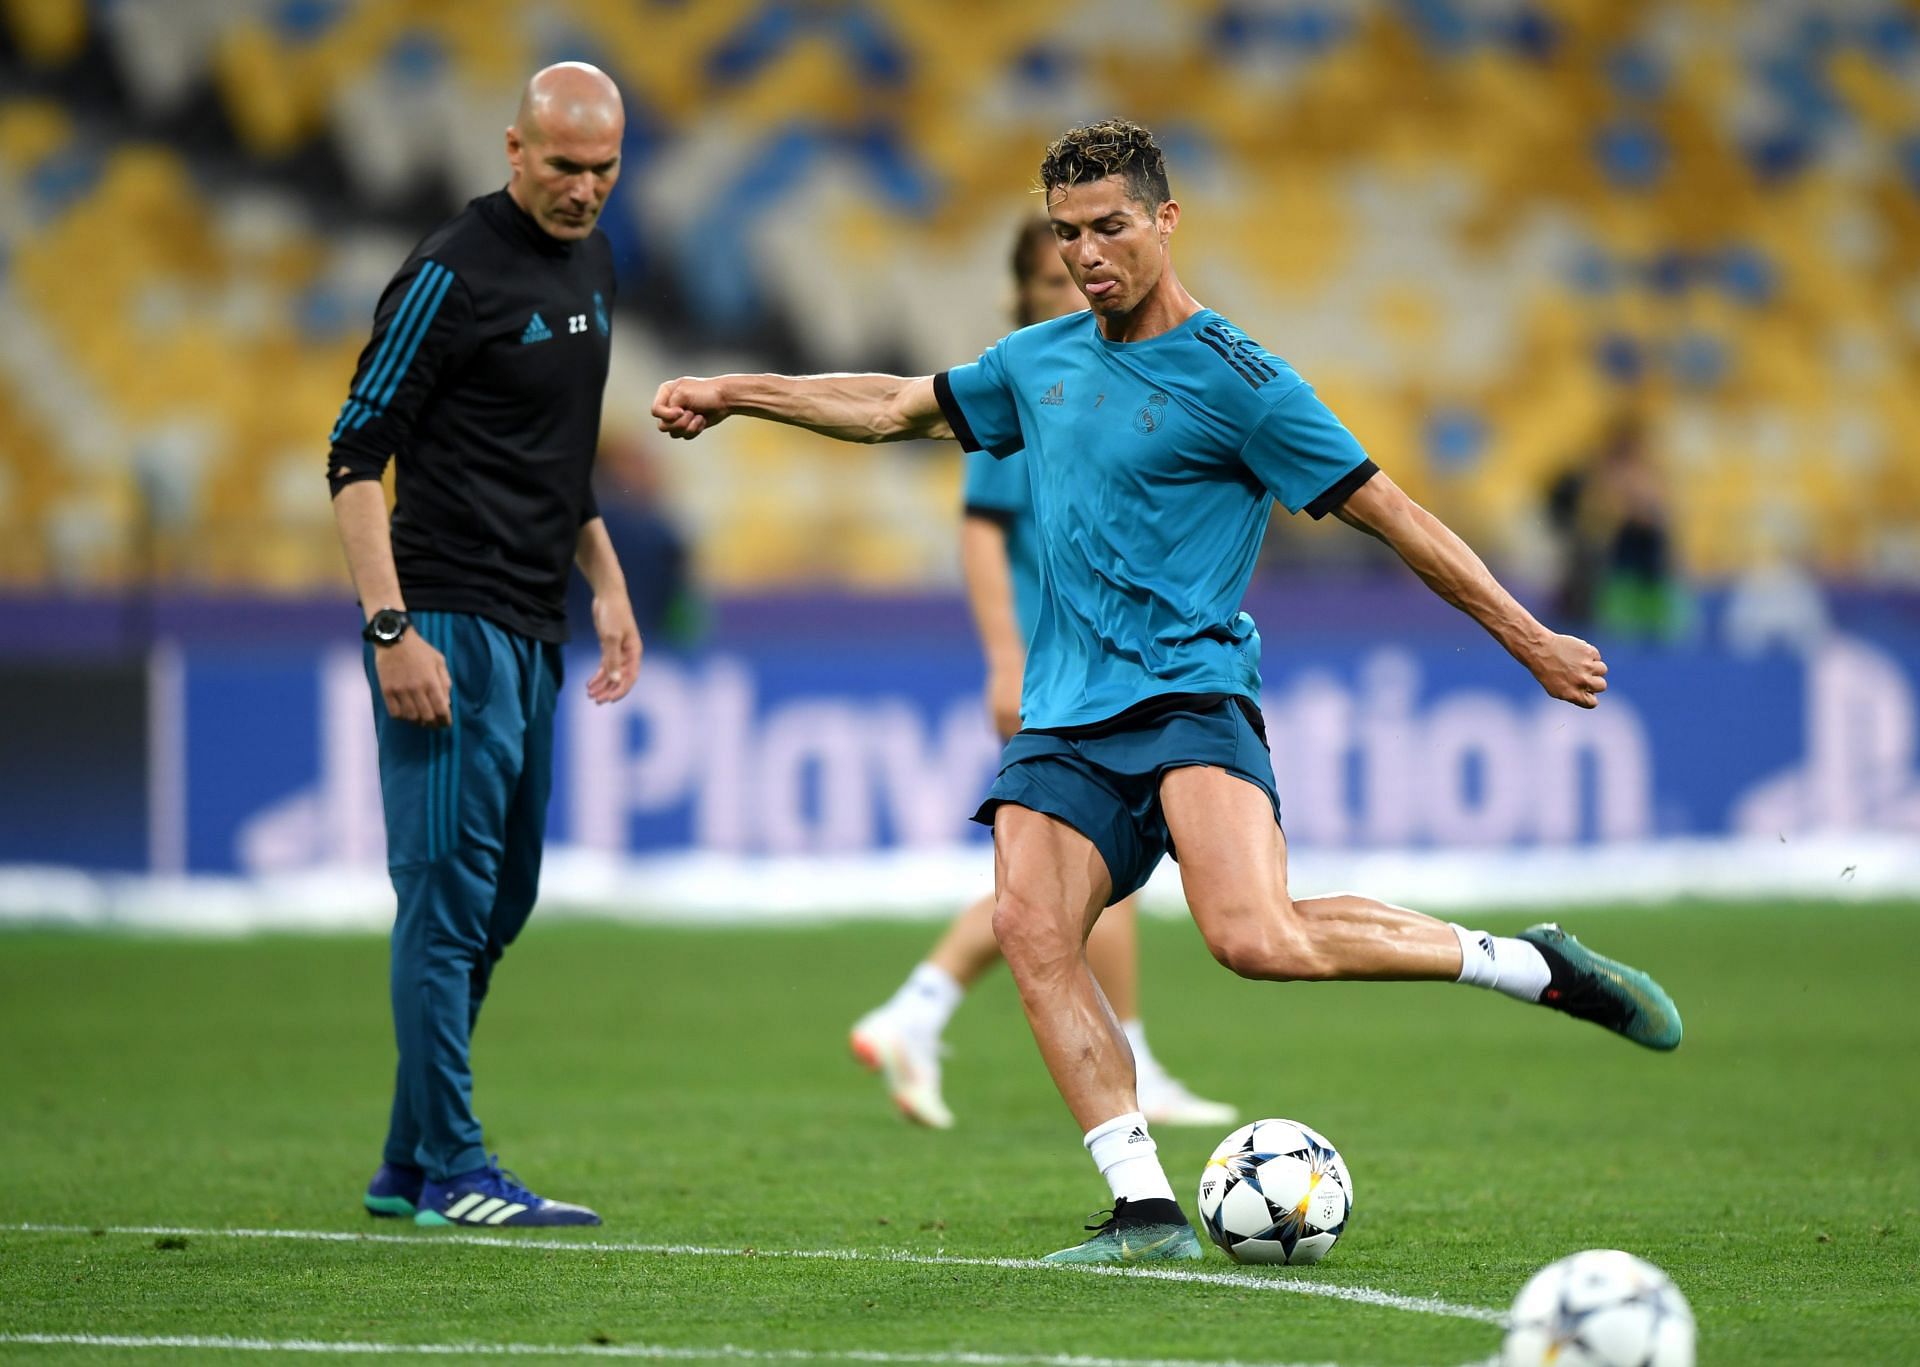 Real Madrid Training Session - UEFA Champions League Final Previews.